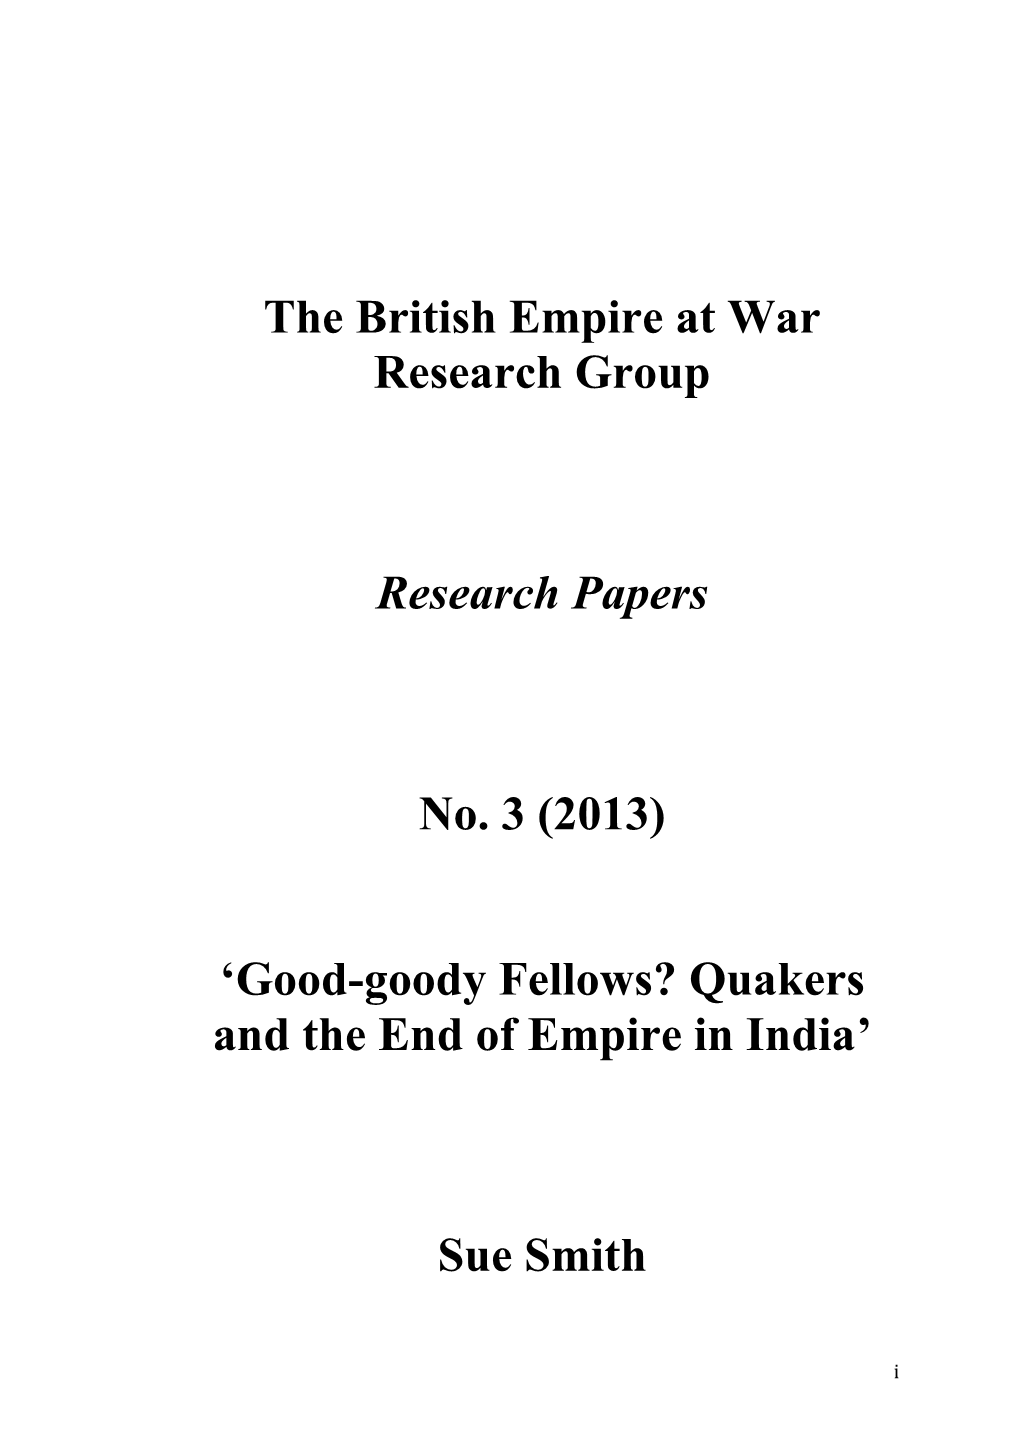 Quakers and the End of Empire in India’